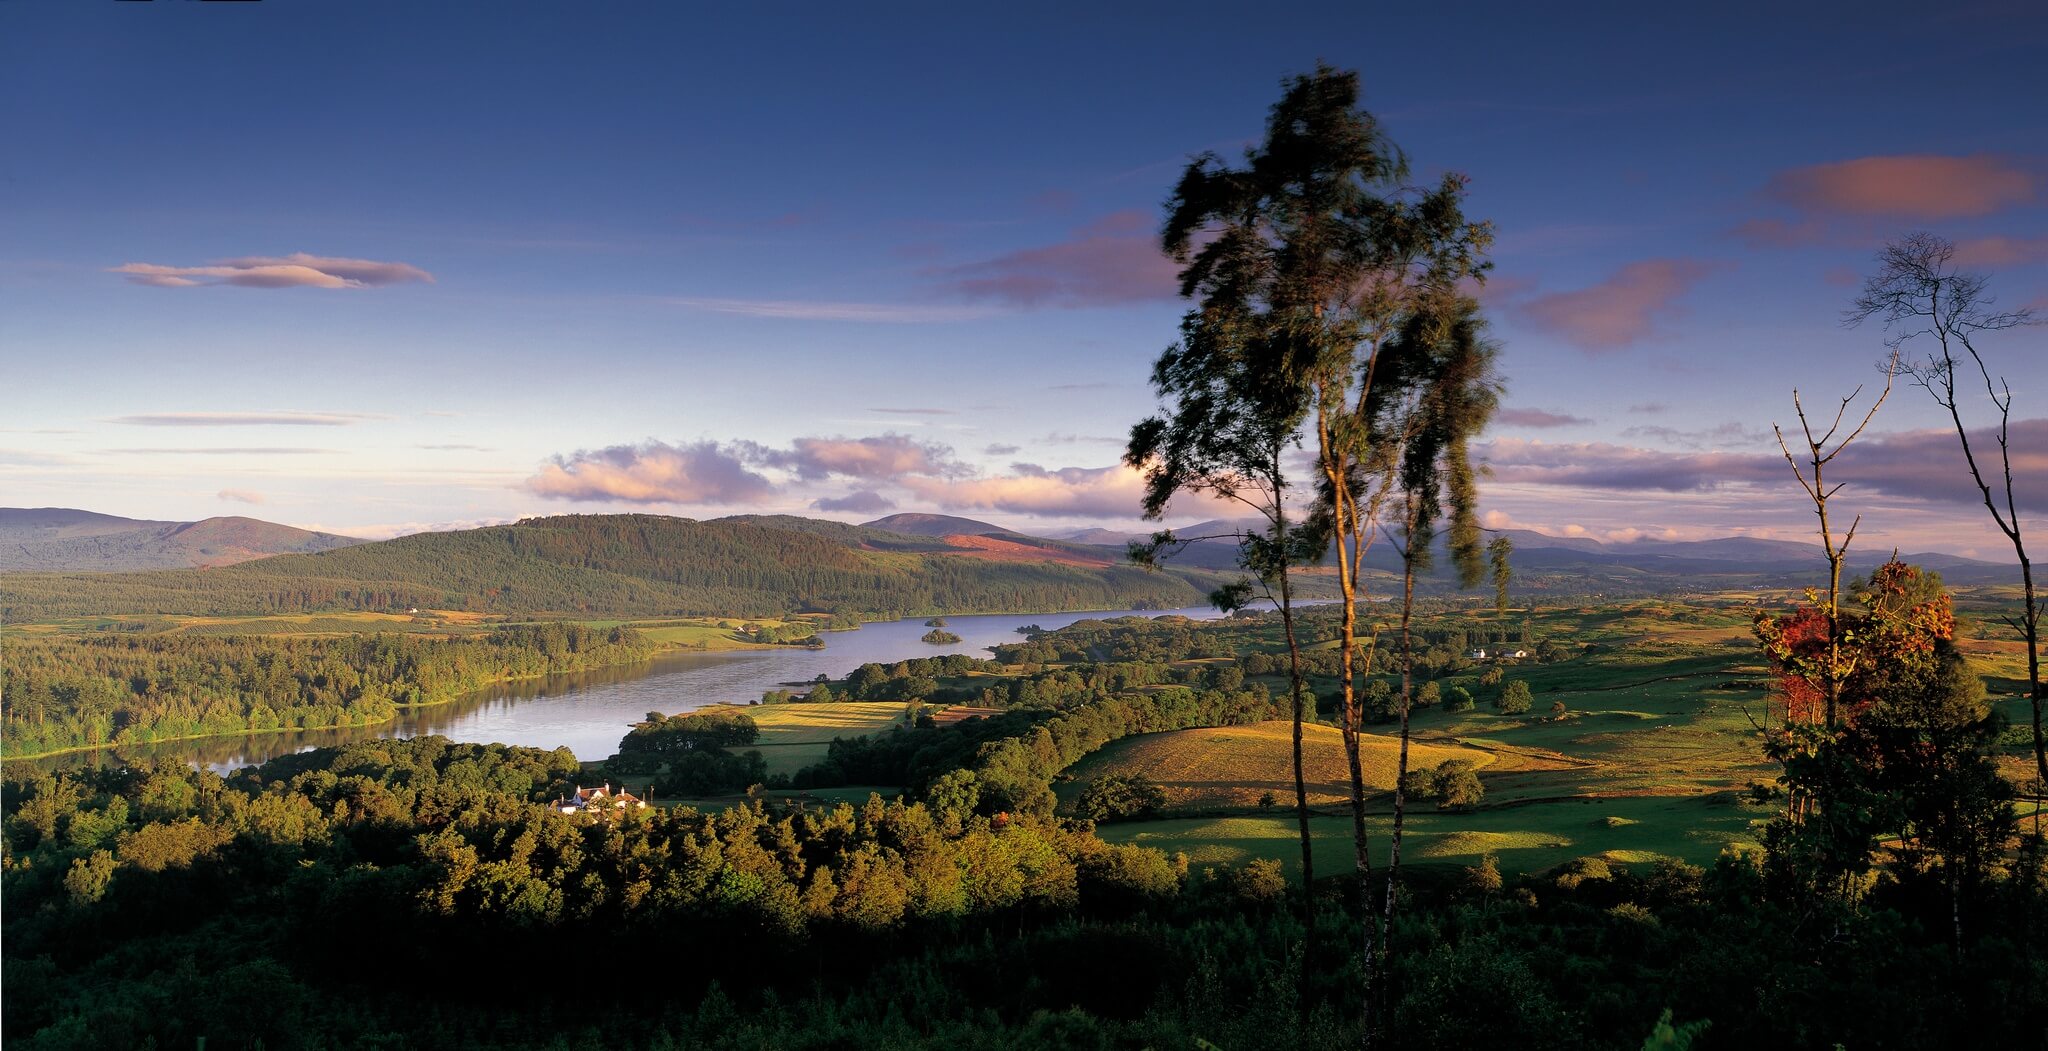 scotland holiday places to visit